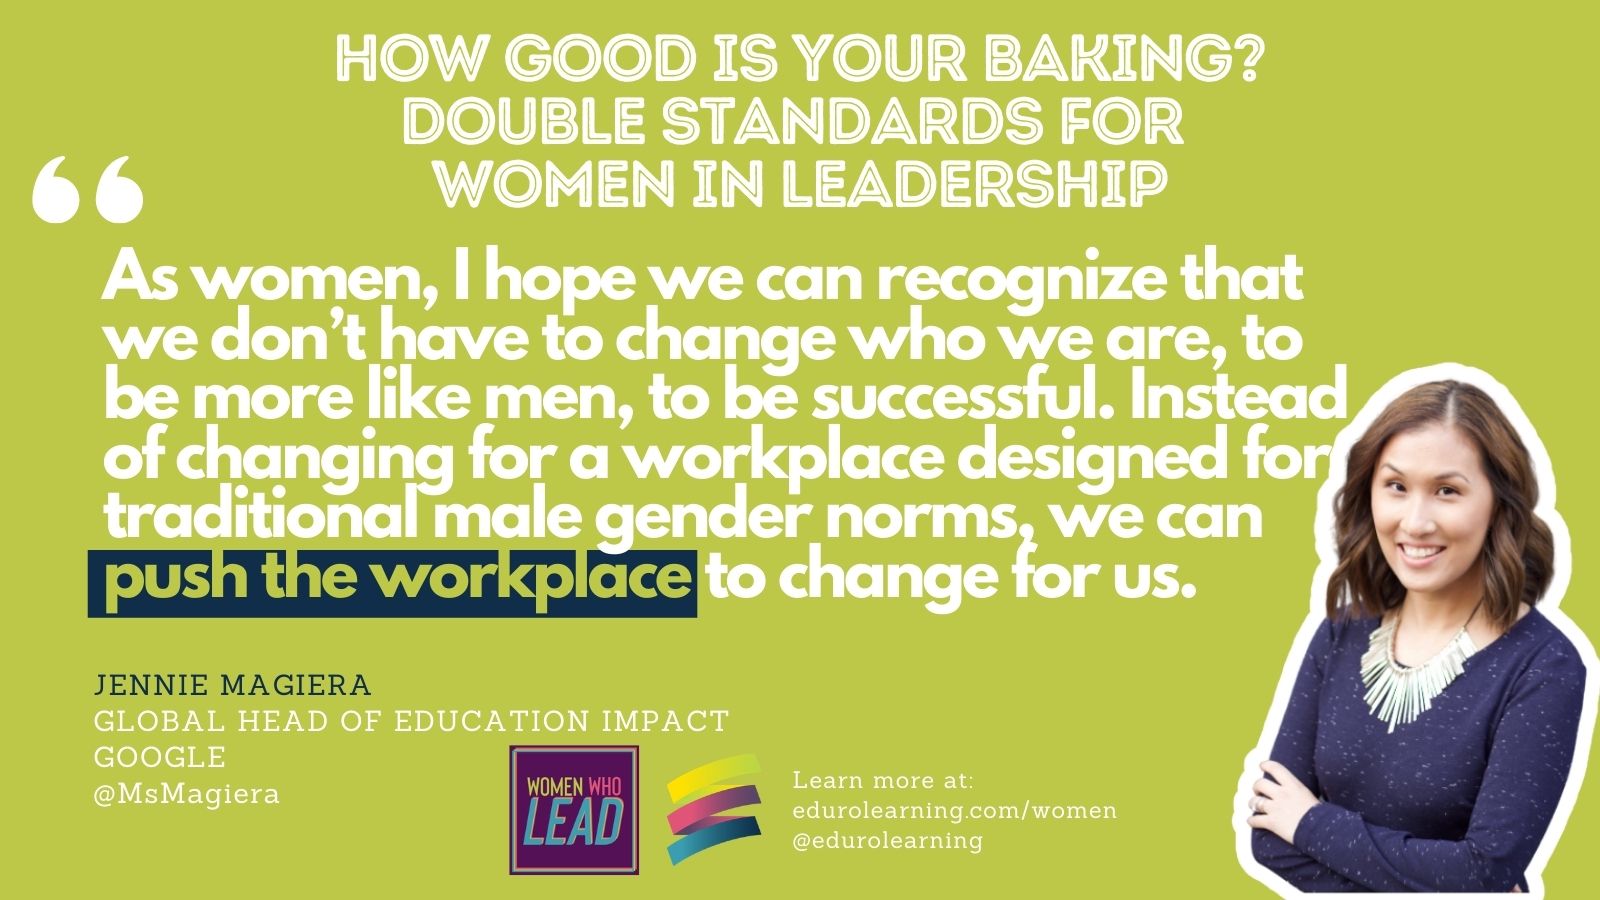 How Good Are You At Baking? Double Standards for Women in Leadership